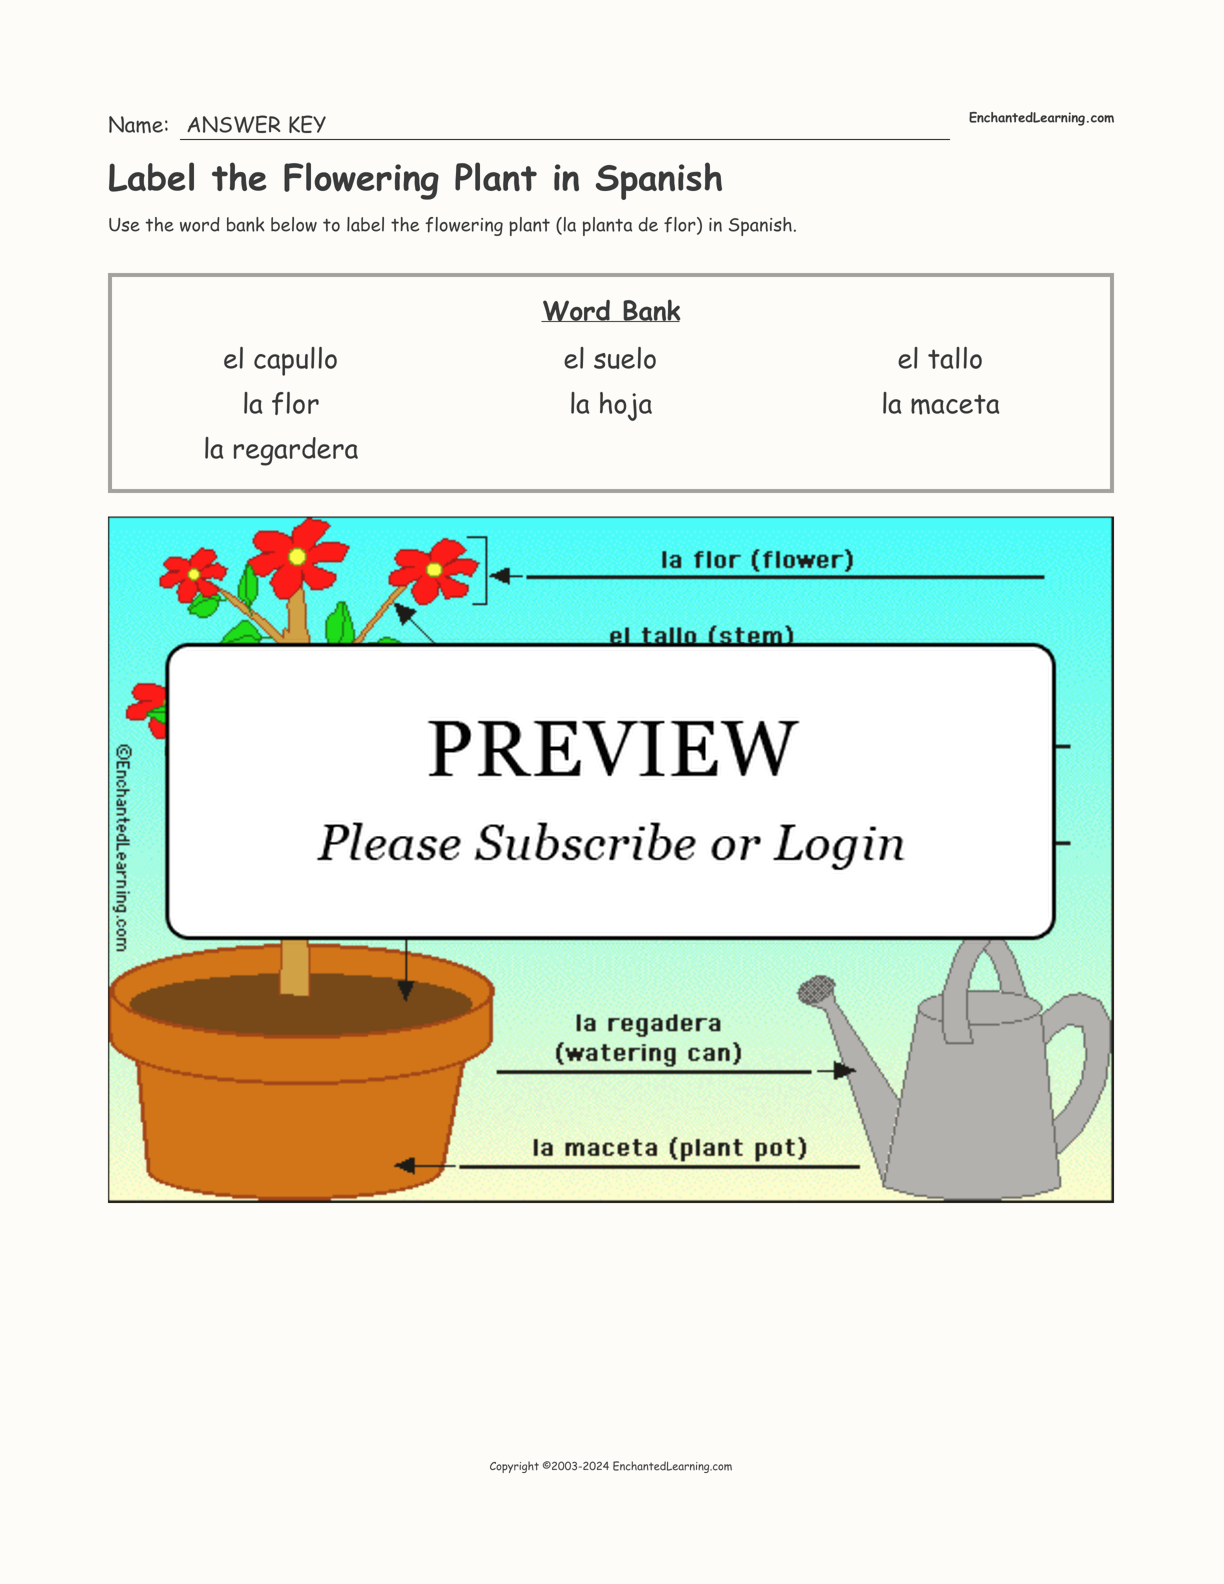 Label the Flowering Plant in Spanish interactive worksheet page 2